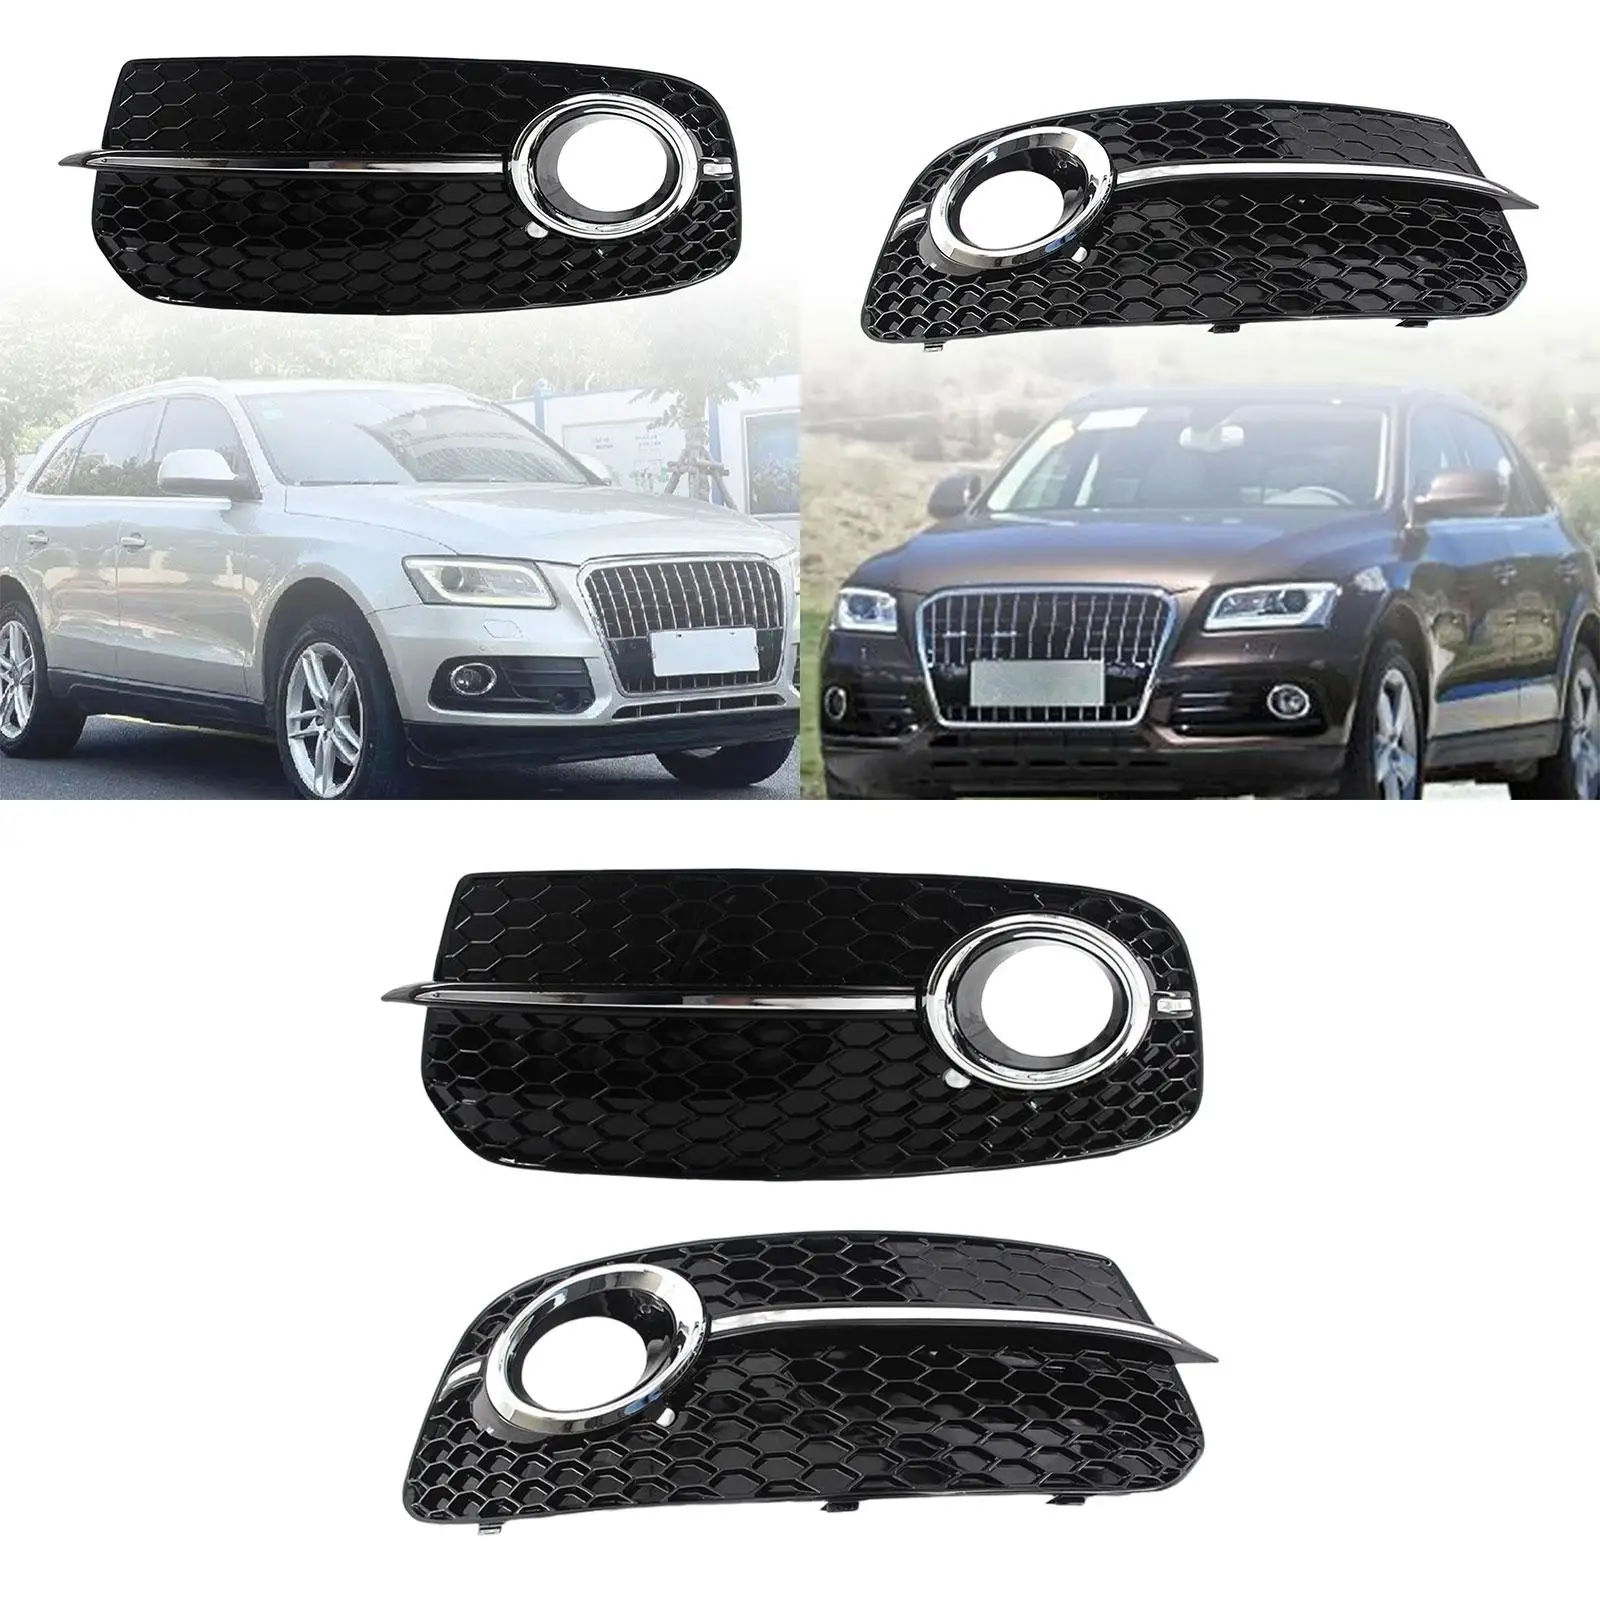 Front Bumper Fog Light Lamp Grille Cover Trim Replacement Car Easy to Install Professional Honeycomb for Audi Q5 2013-2016